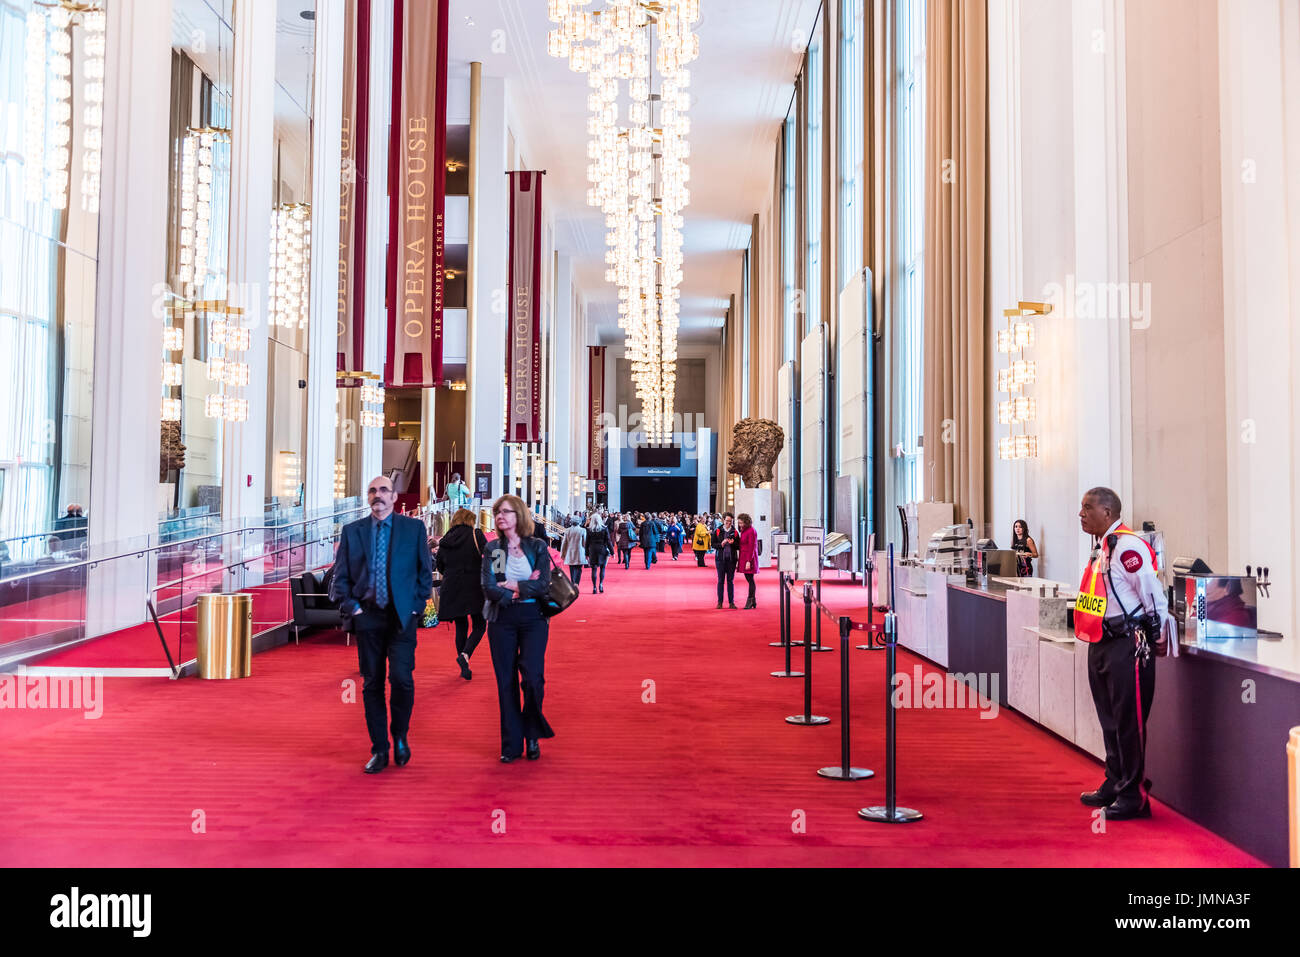 Washington DC, USA - March 20, 2017: John F. Kennedy Center for performing arts interior architecture with tall ceilings and chandeliers Stock Photo